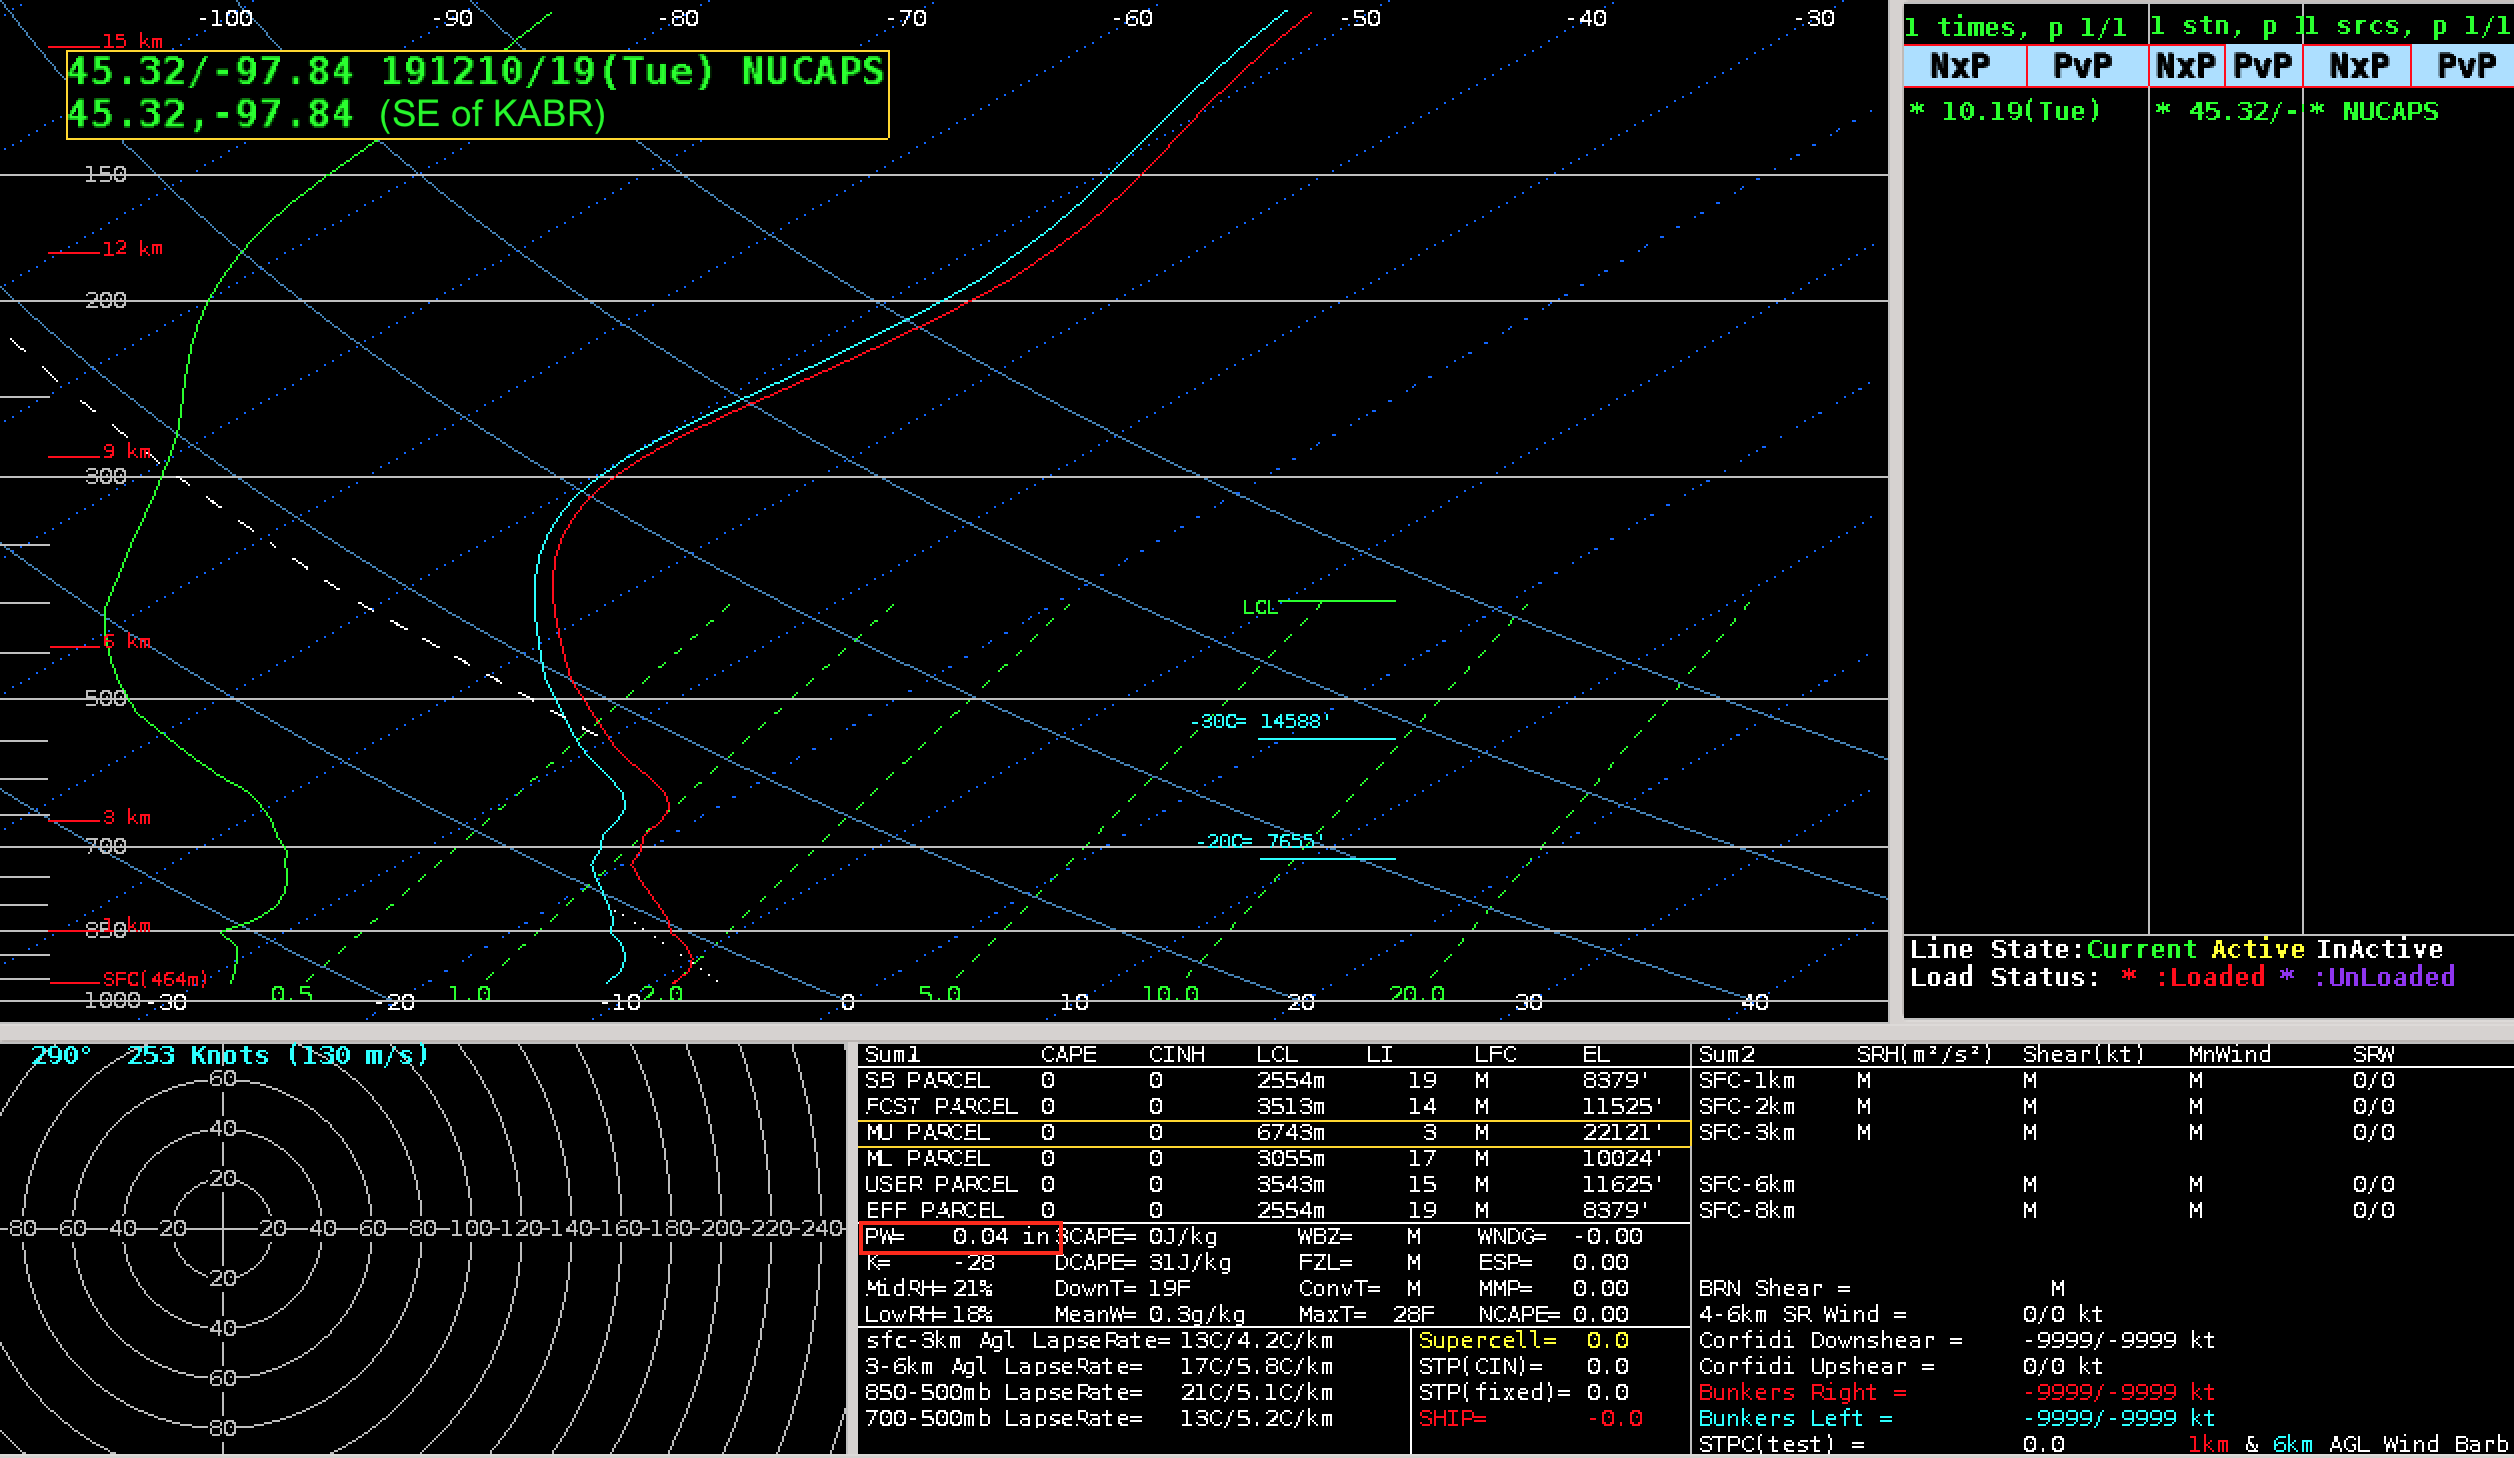 NOAA-20 NUCAPS sounding profile southeast of Aberdeen KABR (Point 2) [click to enlarge]